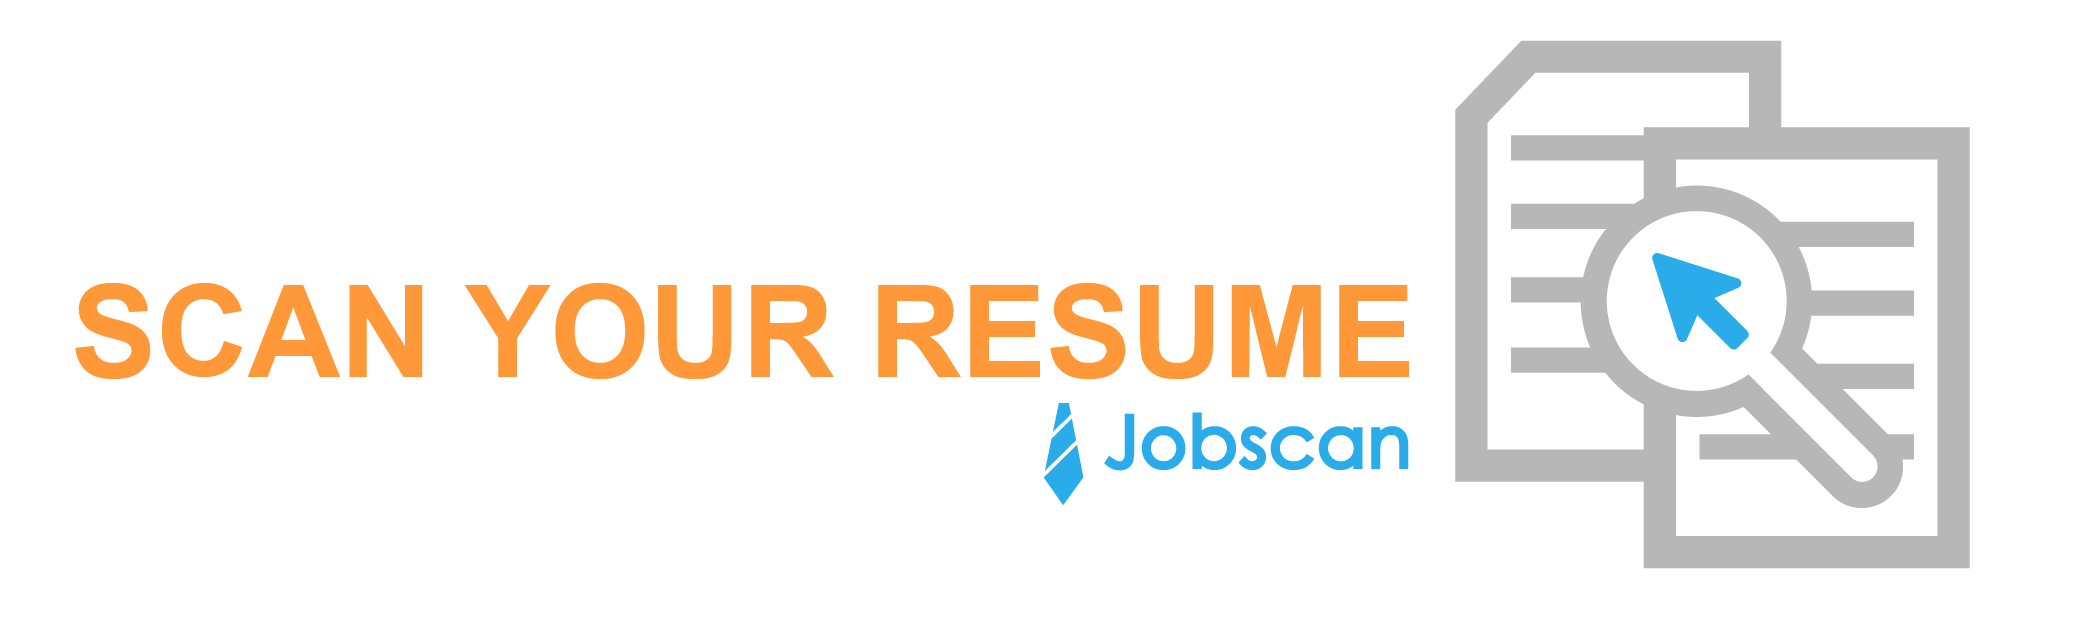 Scan your resume for new resume formatting checks.